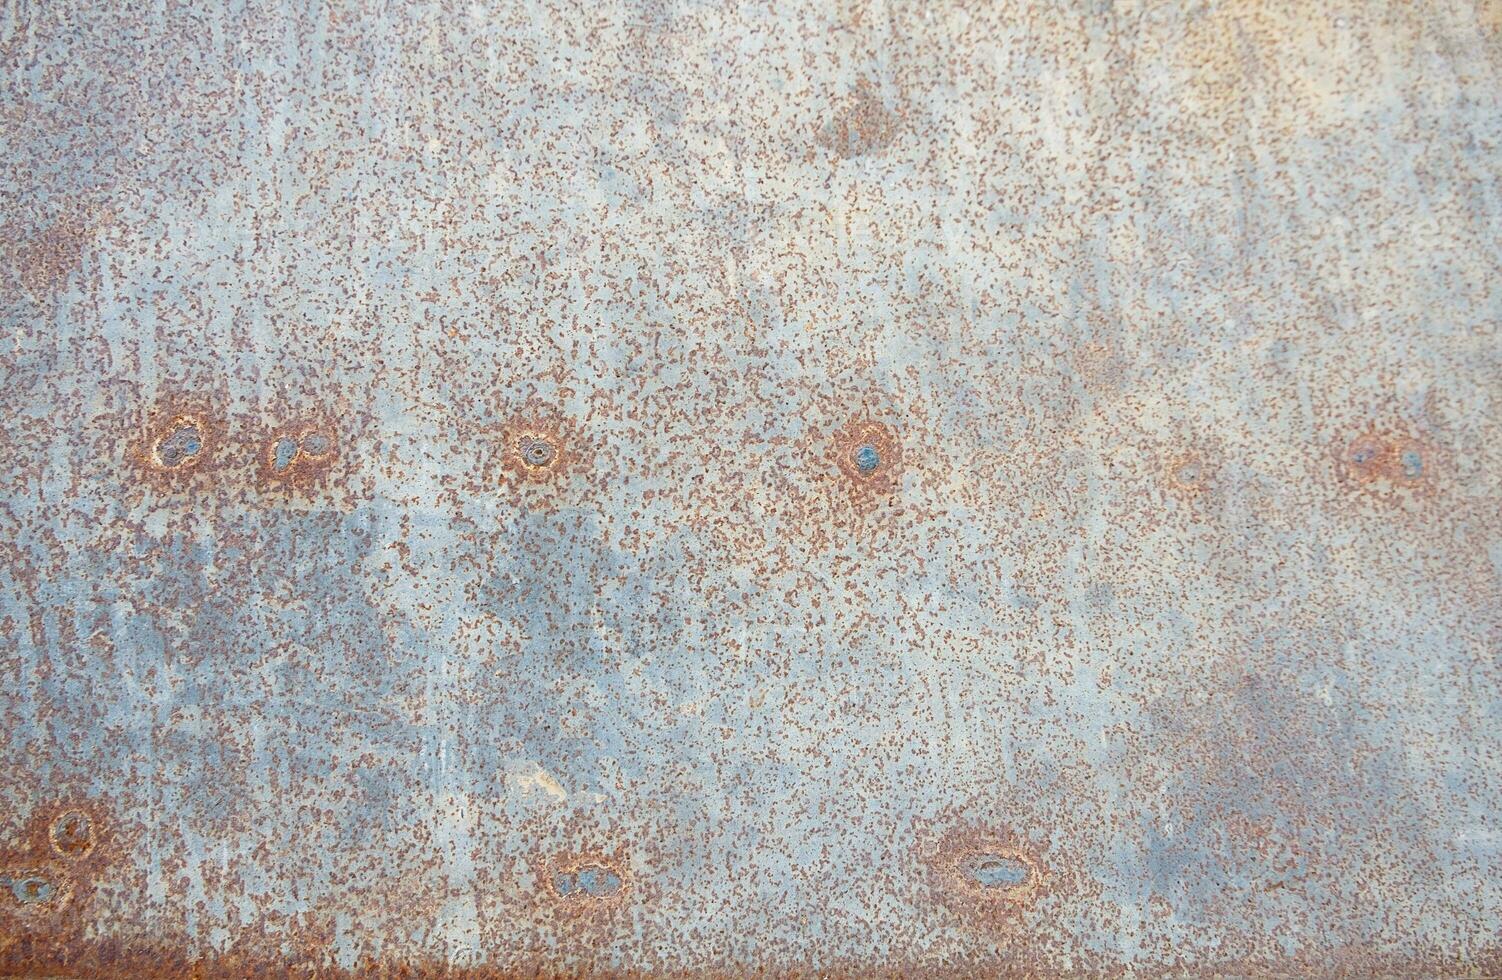 Rust on surface of the old iron photo